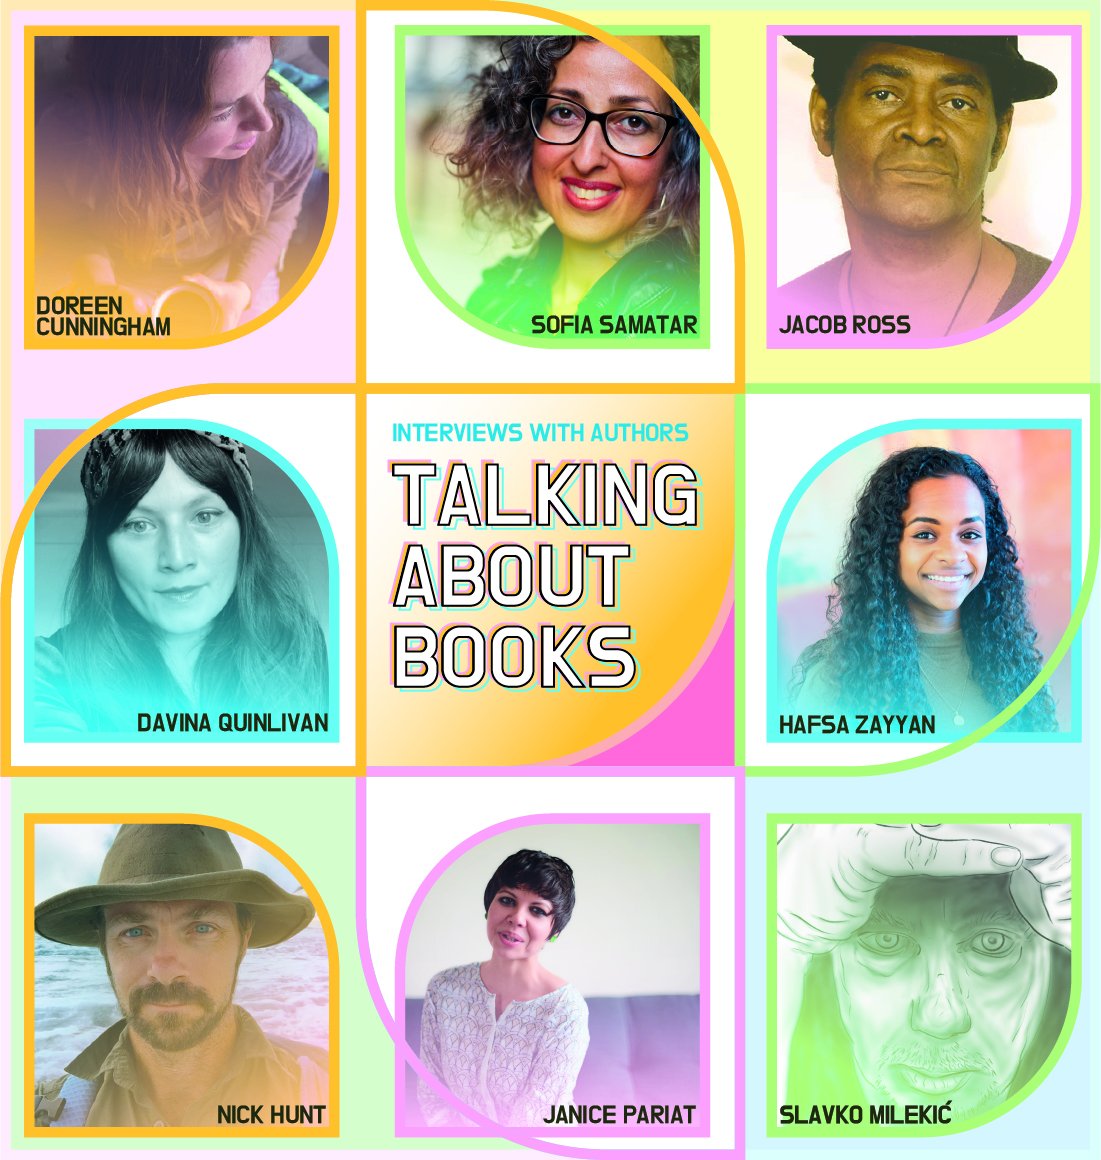 Check out this year's #authorinterviews on Talking About Books! @sea_mammal @rosswriterj @DQuinlivanB @underscrutiny @janicepariat 
talking-about-books.com/category/inter…